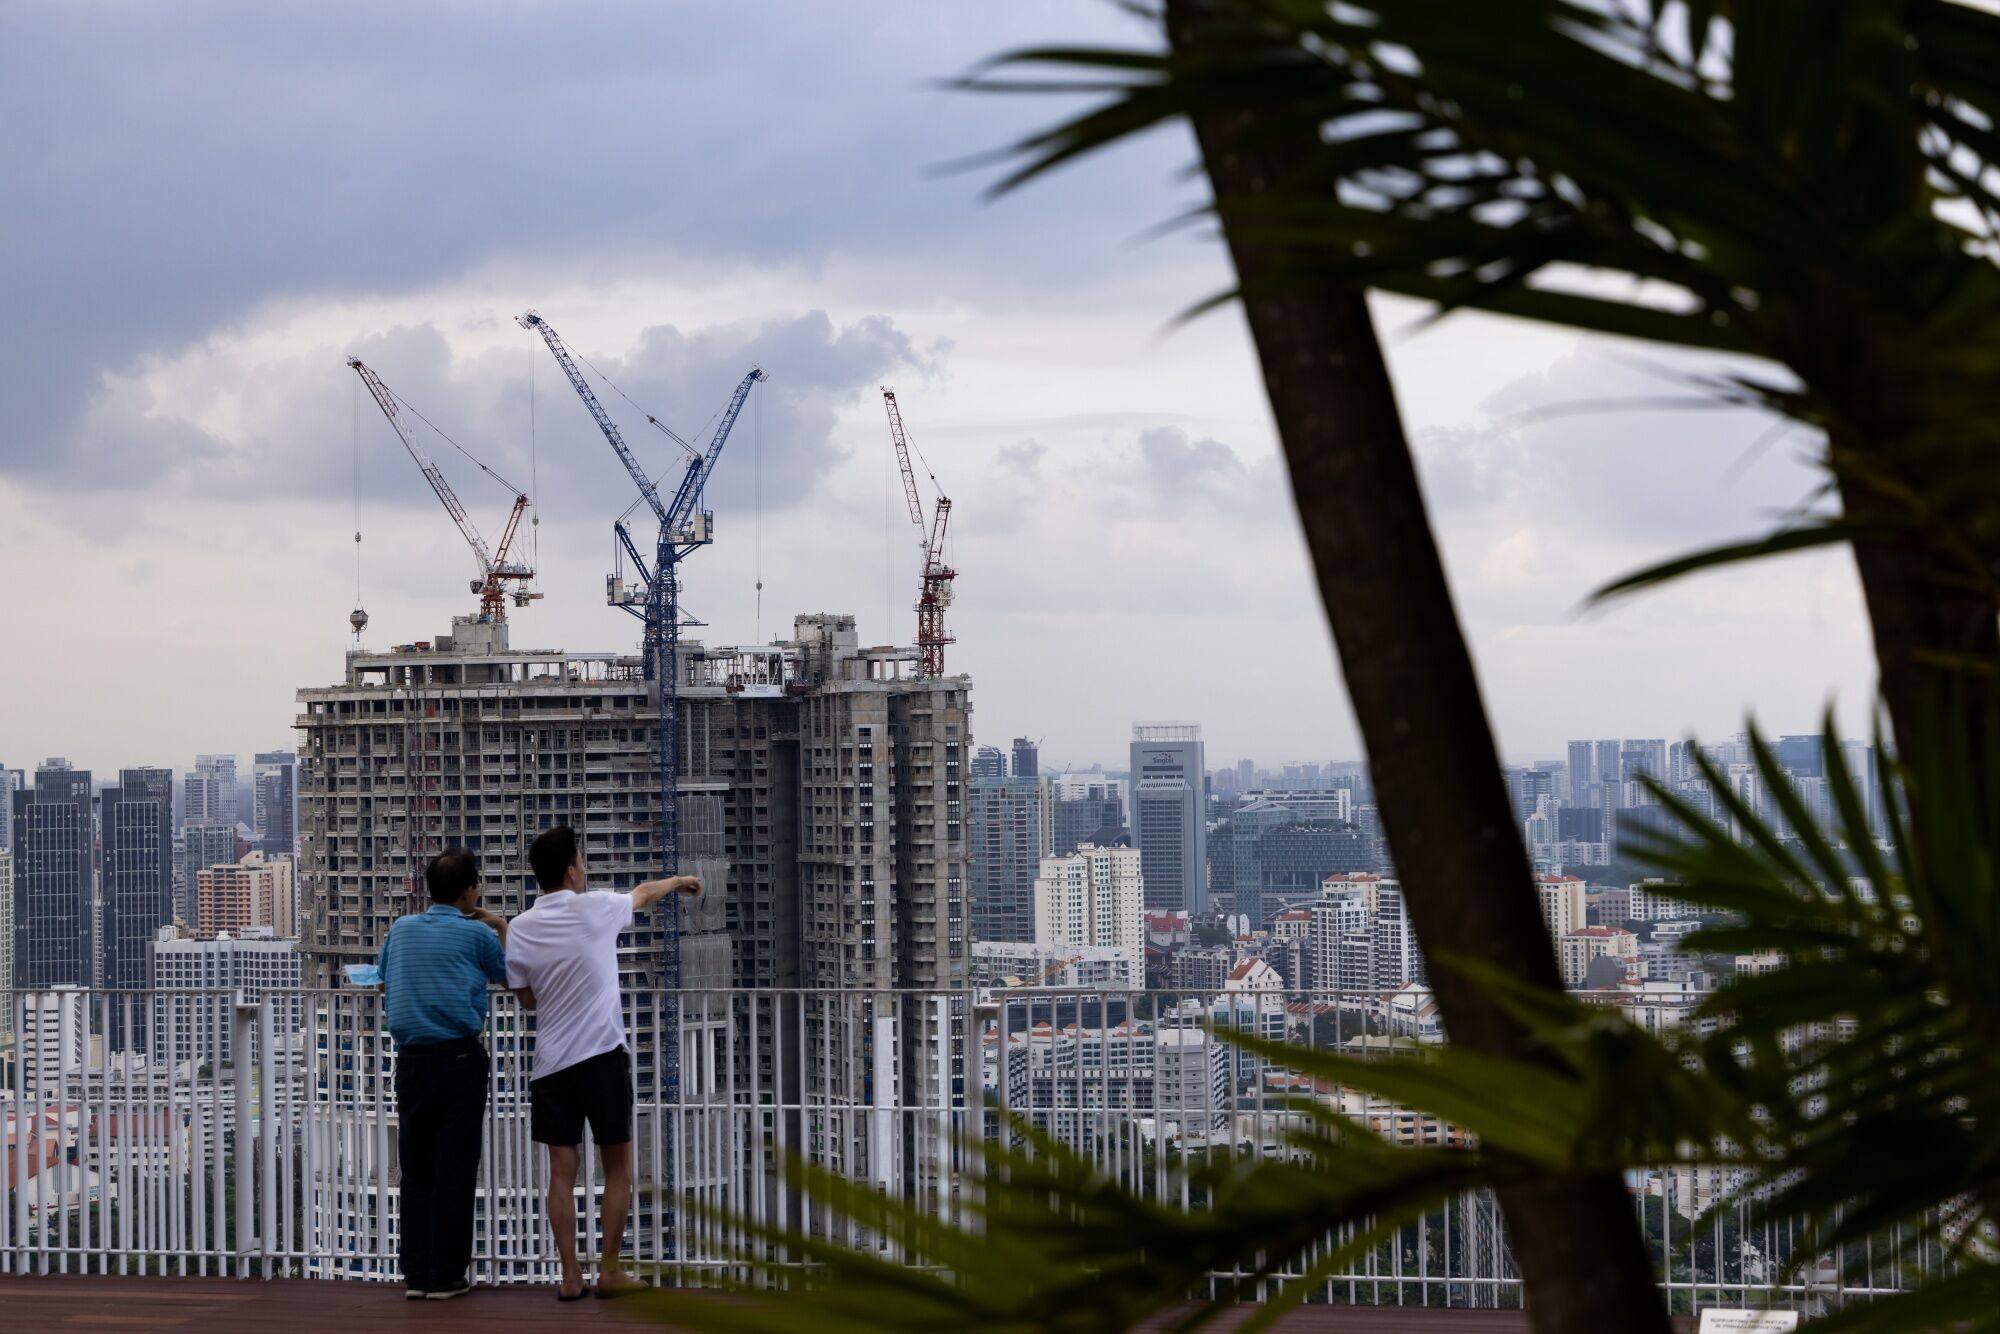 People look at buildings under construction in Singapore on February 17. Rental growth has surged in the city state in recent years, driving residents’ concerns about the cost of living and housing affordability. Photo: Bloomberg